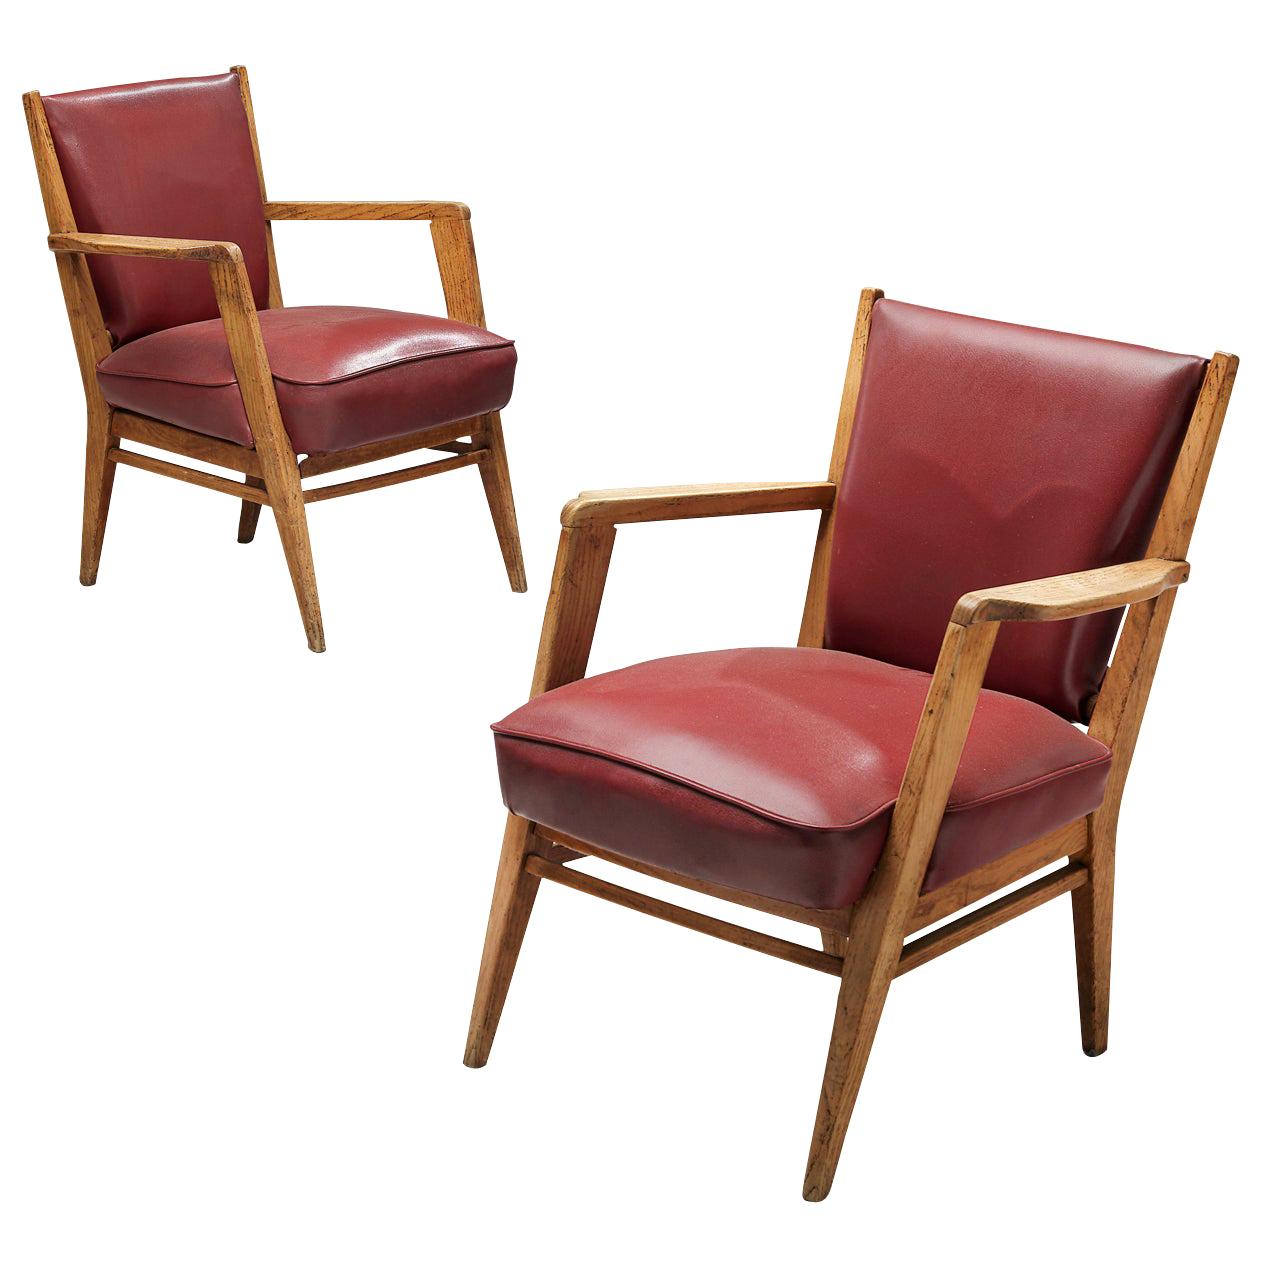 Pair of BBPR Lounge Chairs in Burgundy Leatherette